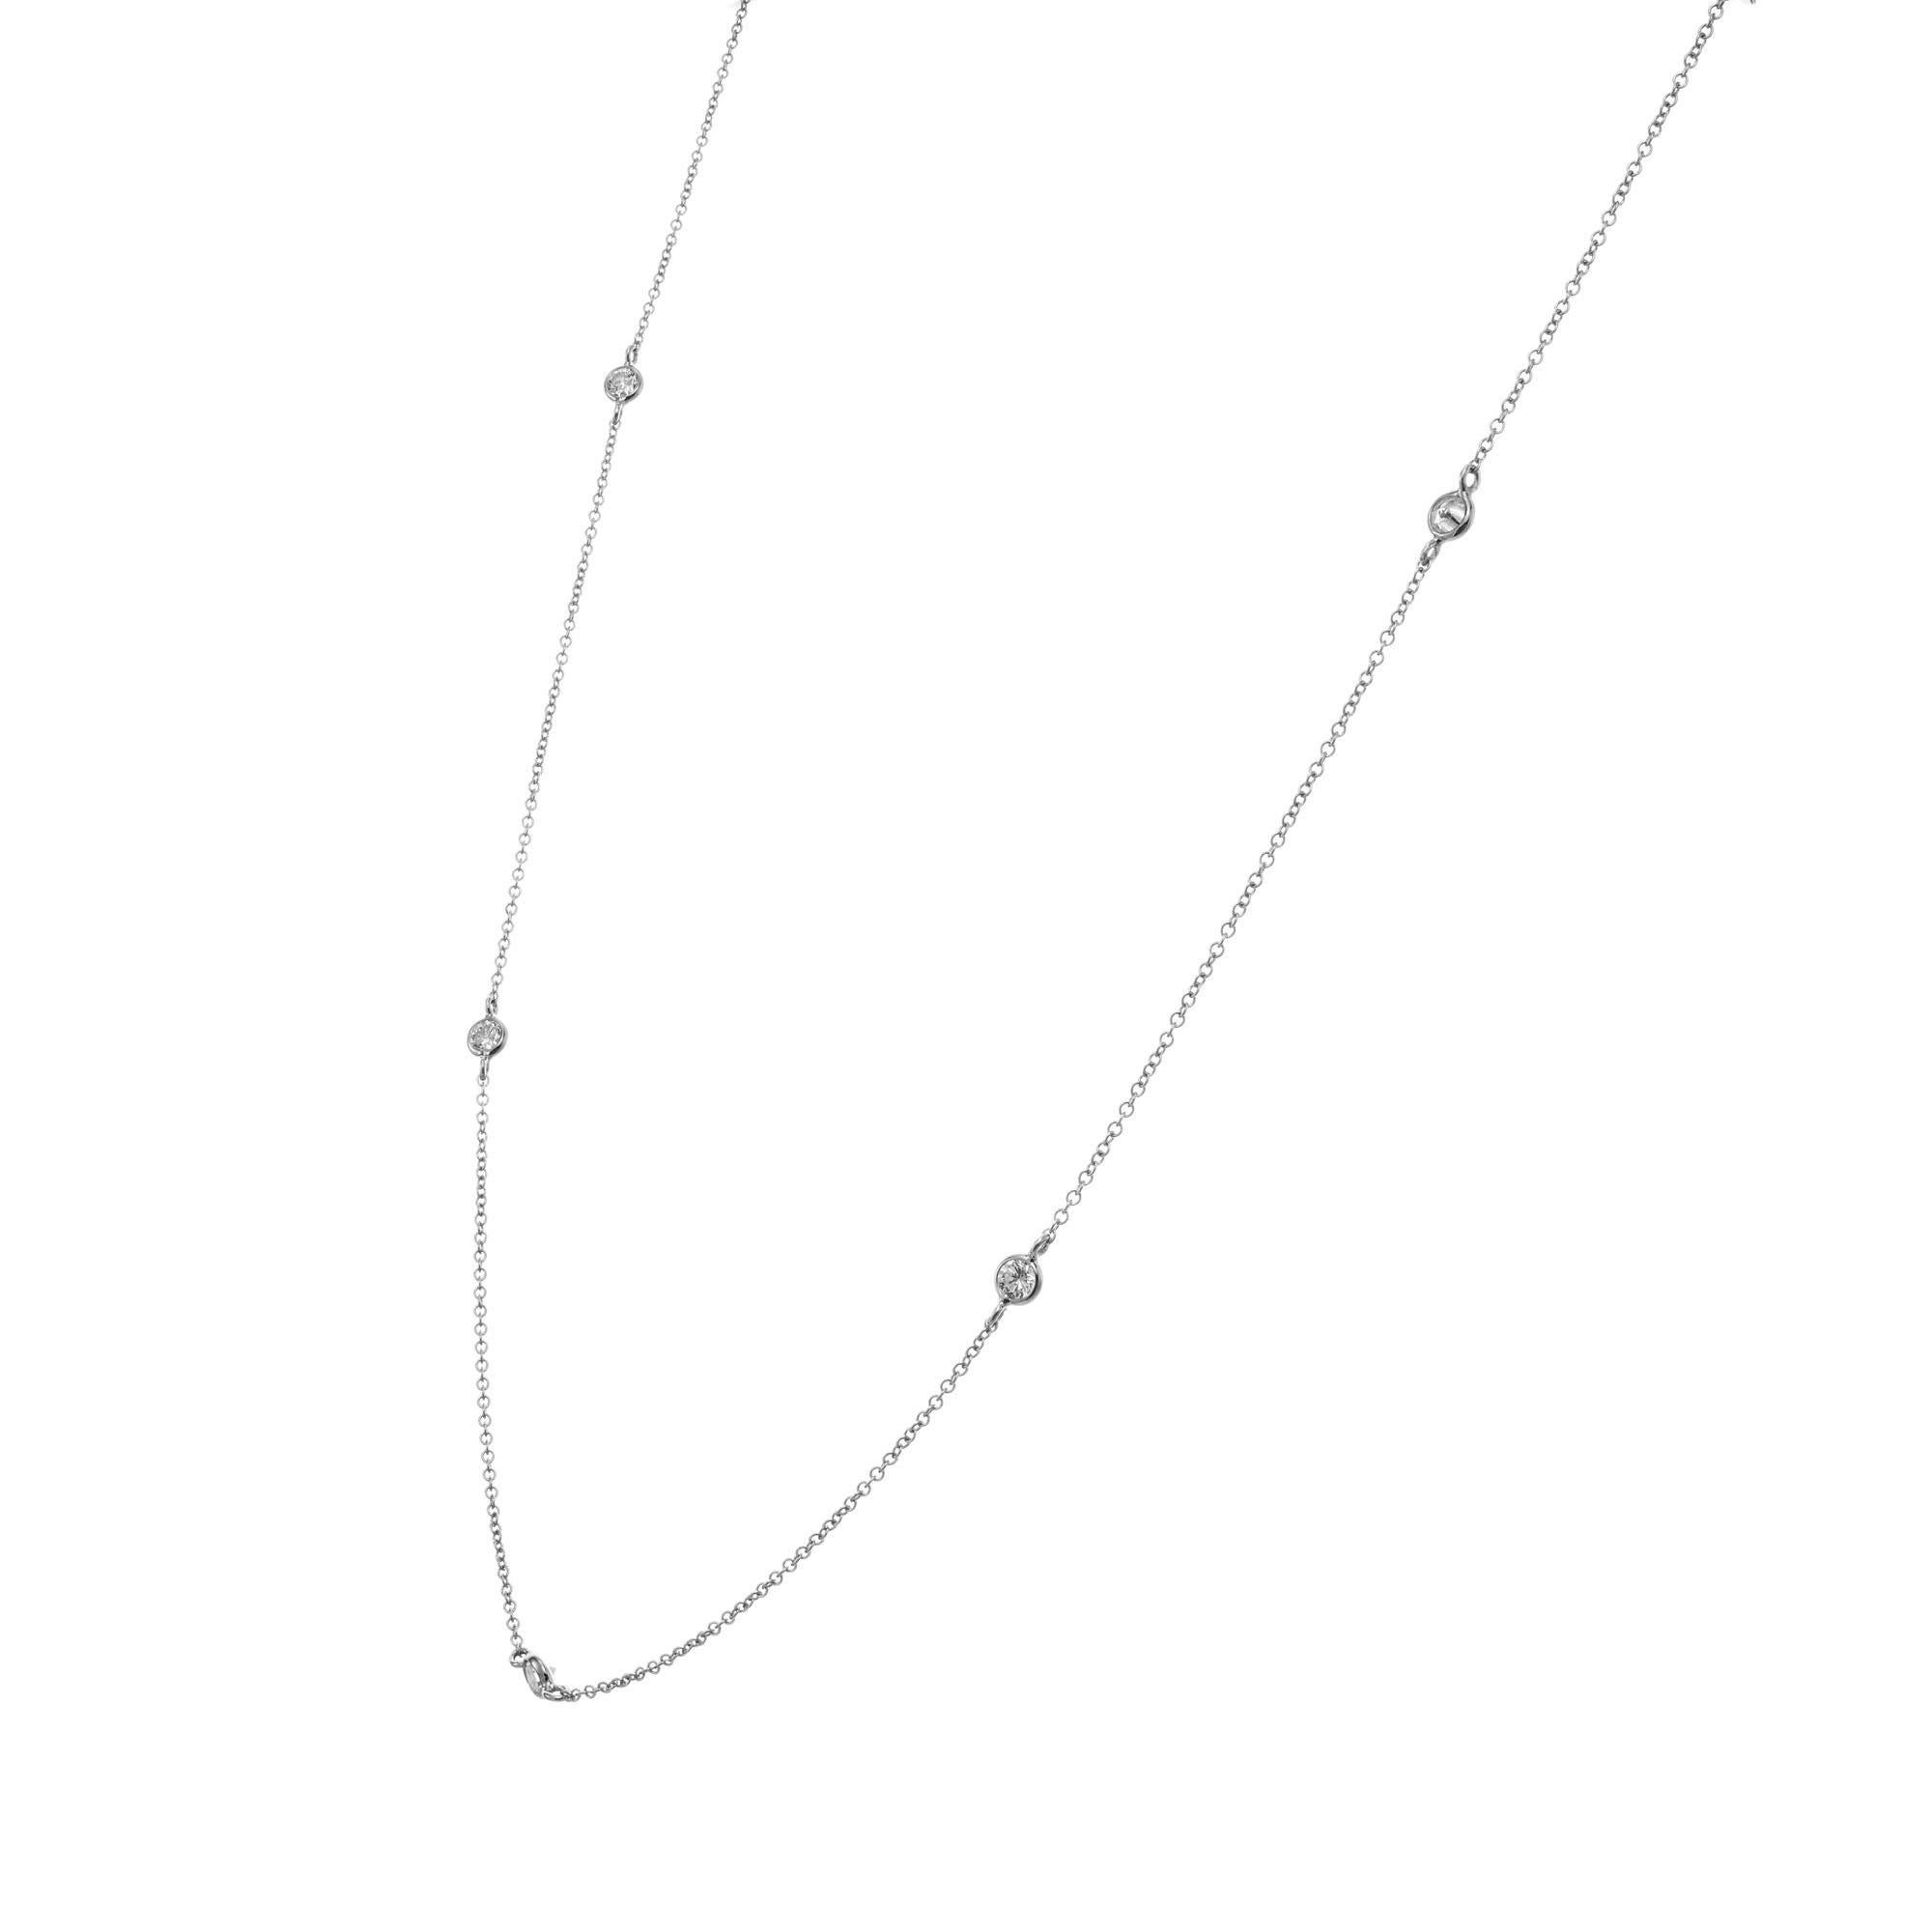 Five diamond .55 carat brilliant cut diamond by the yard 14k white gold necklace. 16.5 inches. 

5 round brilliant cut diamonds, G-H VS-SI approx. .55cts
14k White Gold 
Stamped: 14k 
1.6 grams
Chain: 16.5 Inches
Width: 3.5mm 

